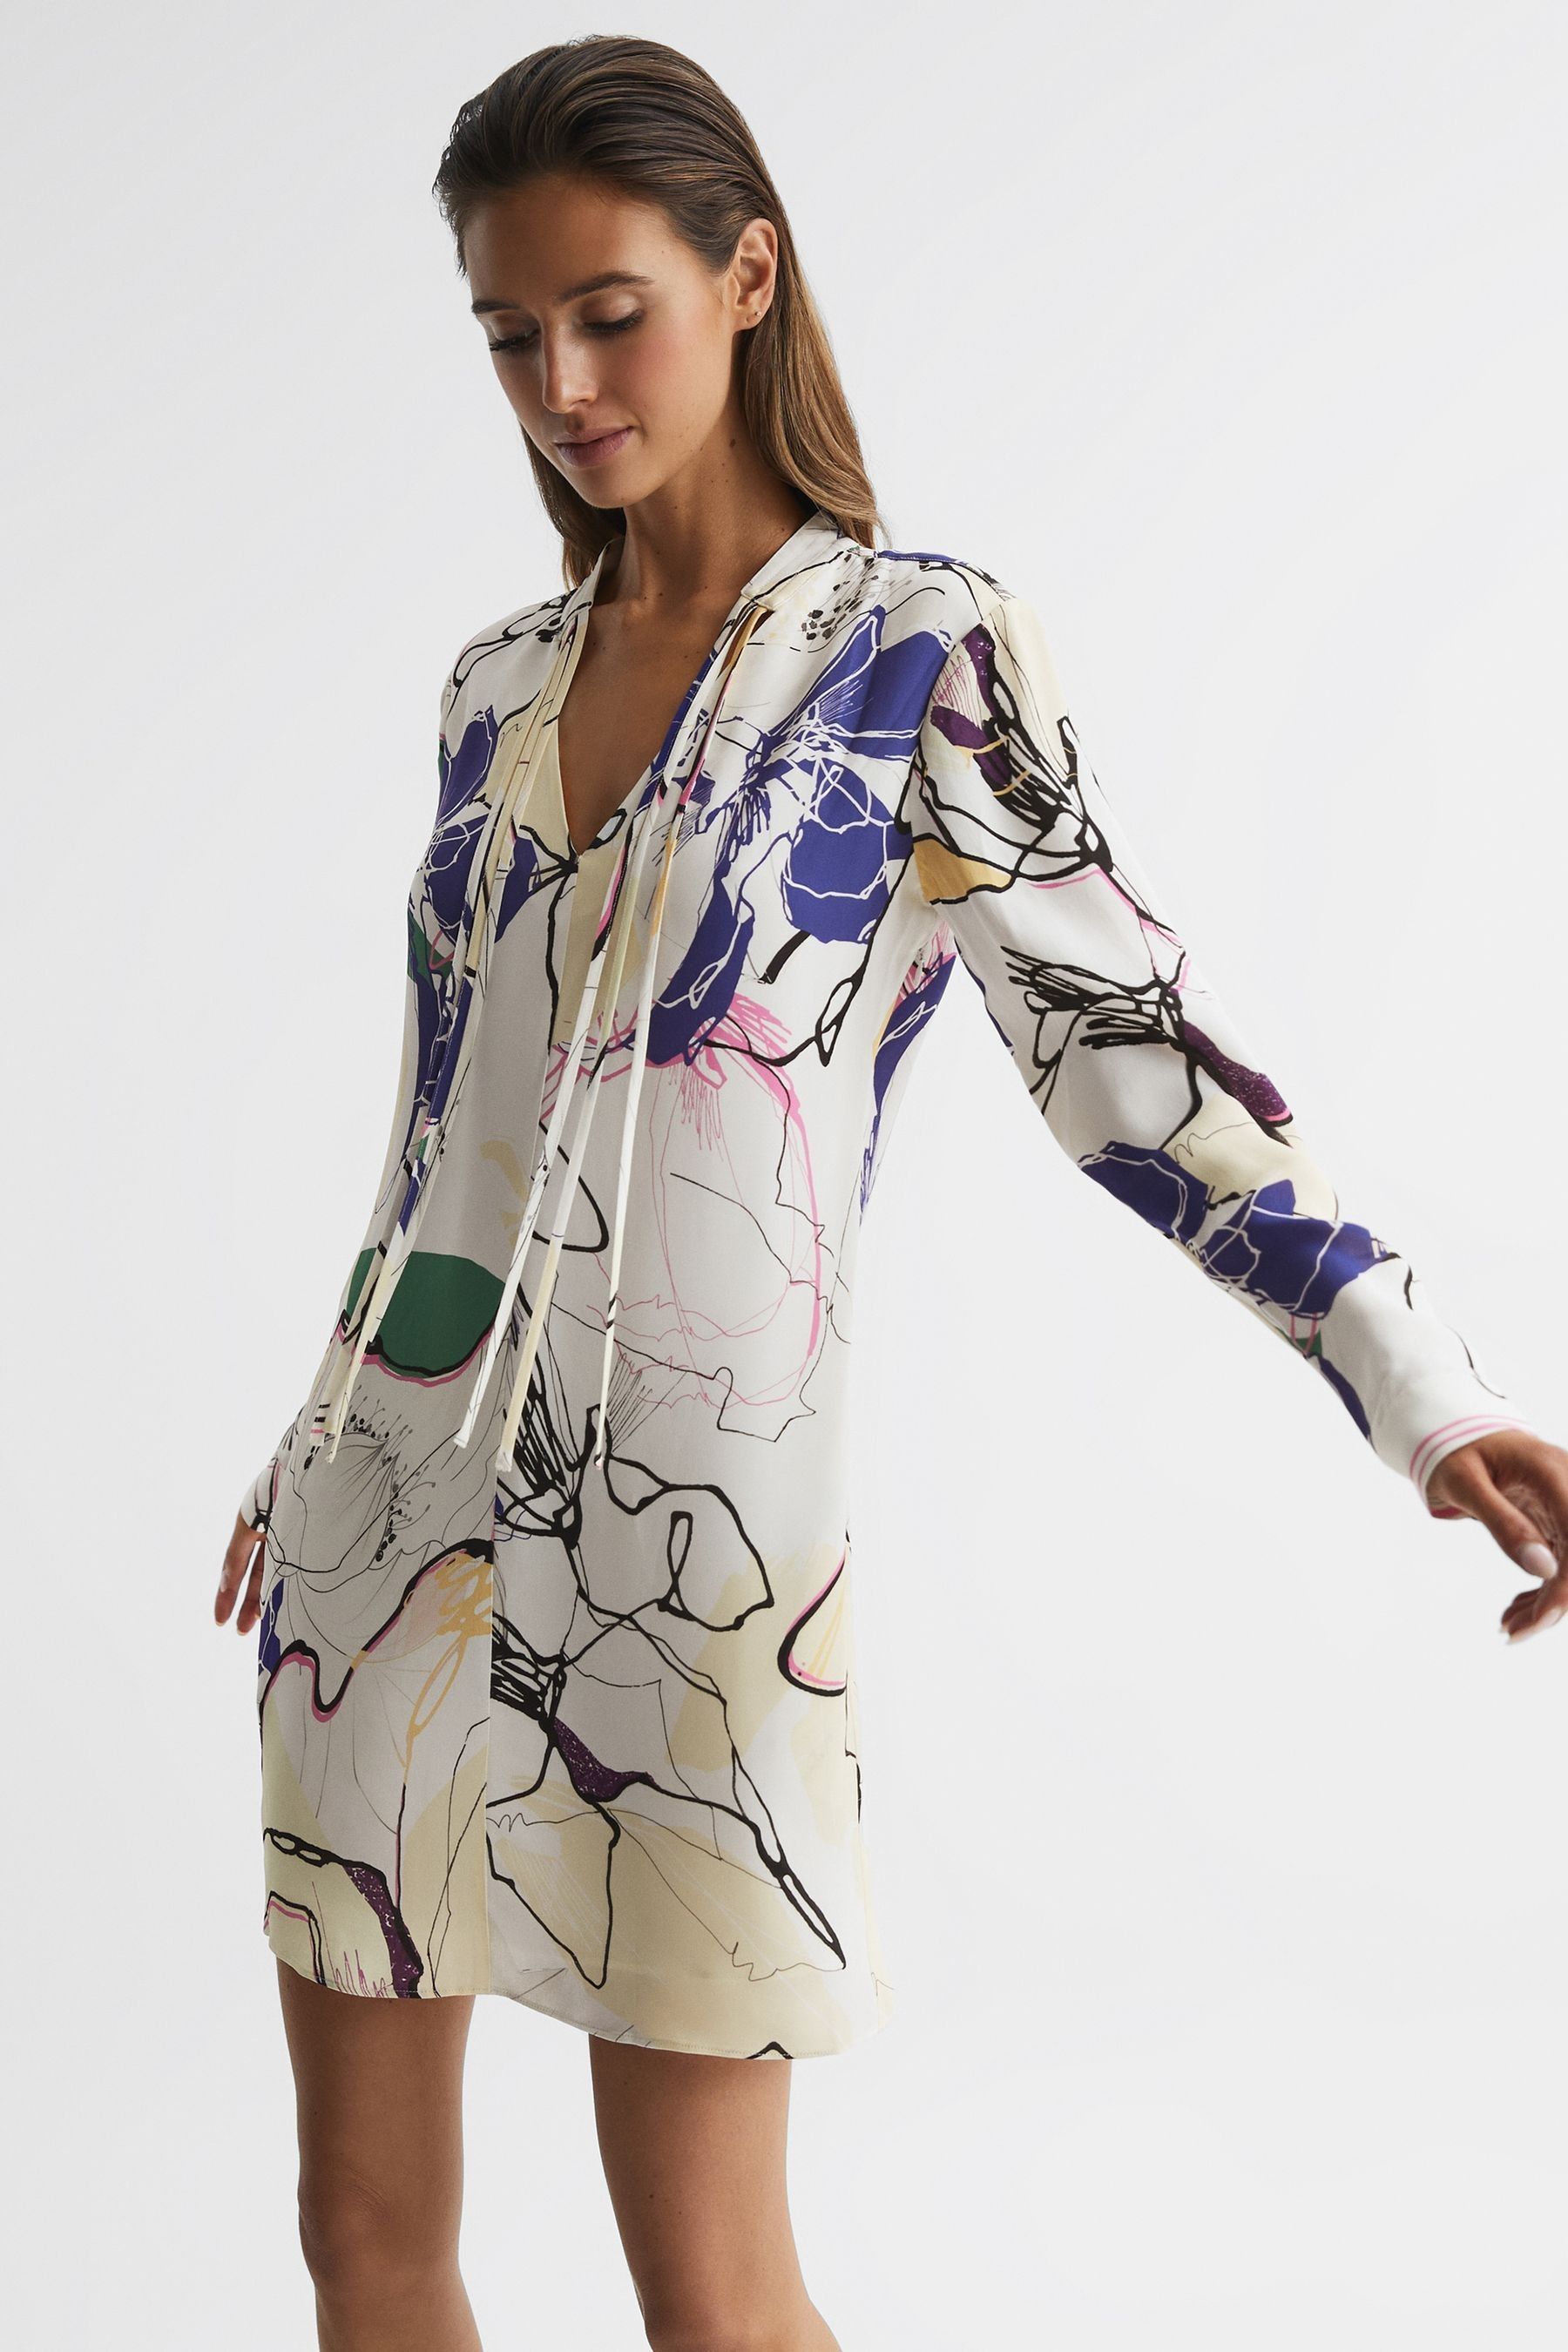 Buy Reiss Ivory Margarite Printed Shift Dress from the Next UK online shop